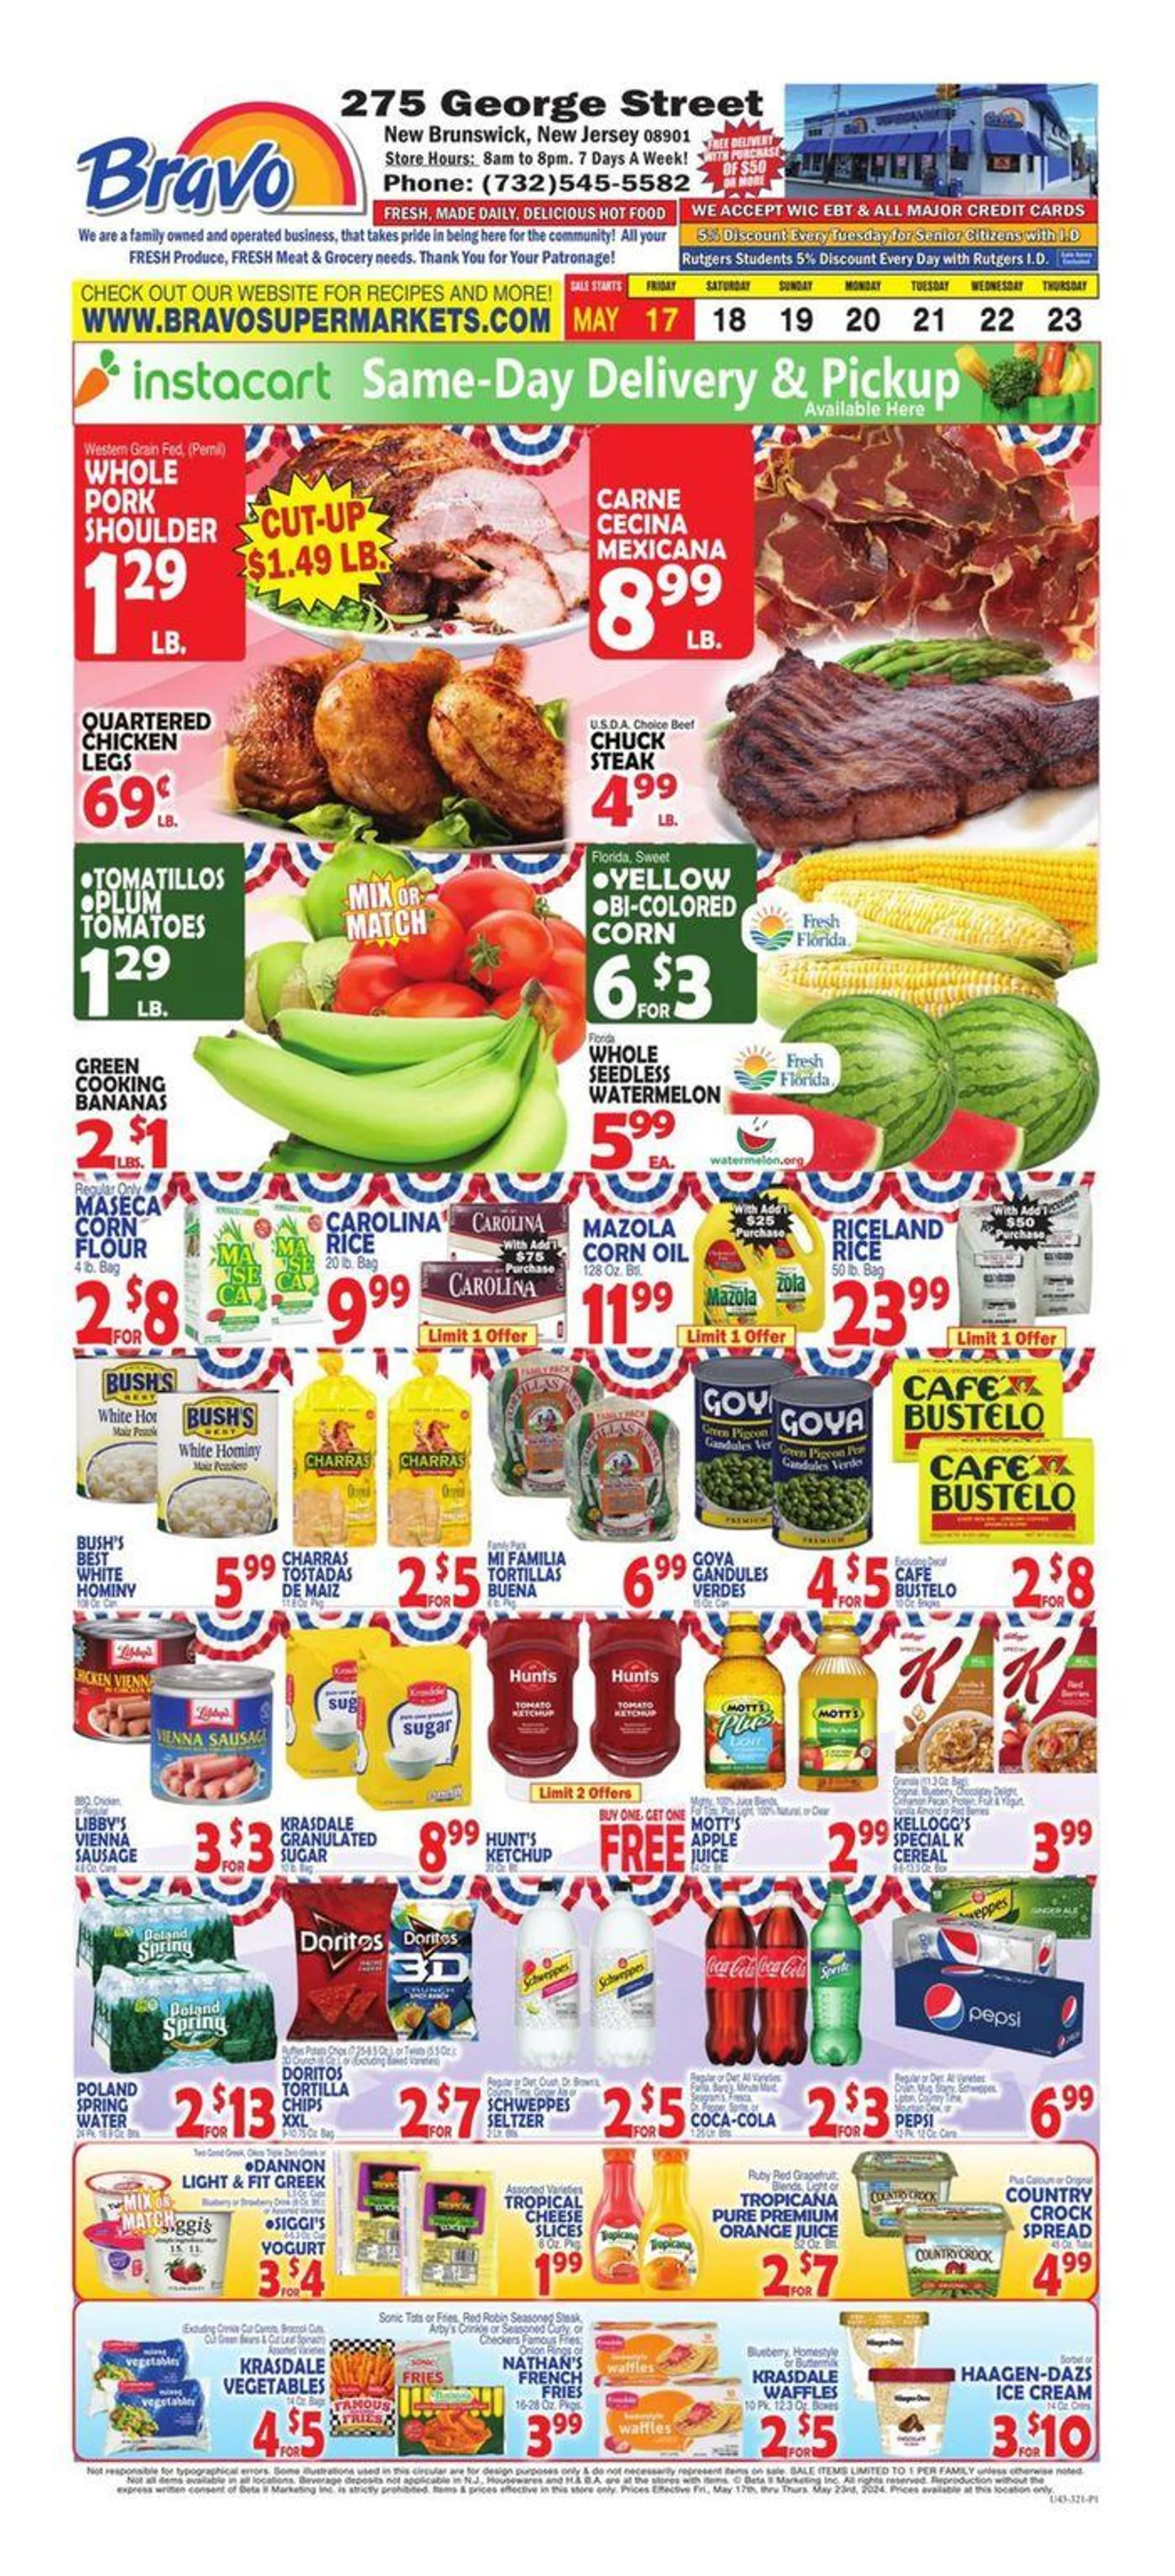 New Weekly Ad - 1